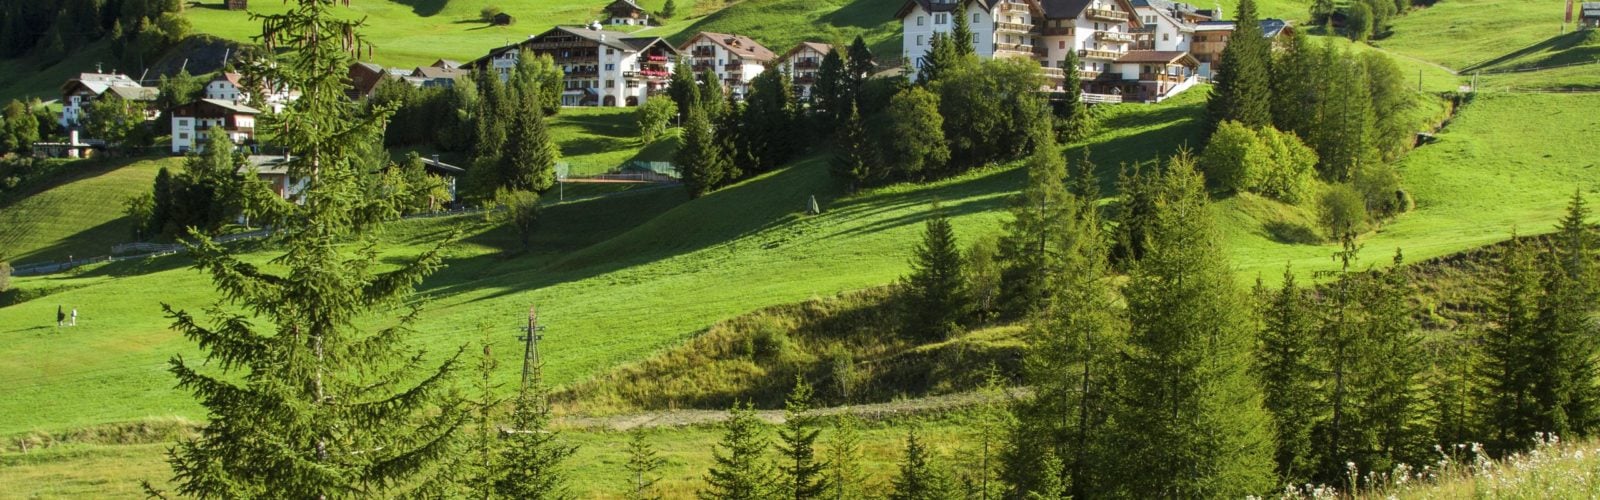 Buildings nestled in the rolling green hills in the foothills of the Dolomites, Italy